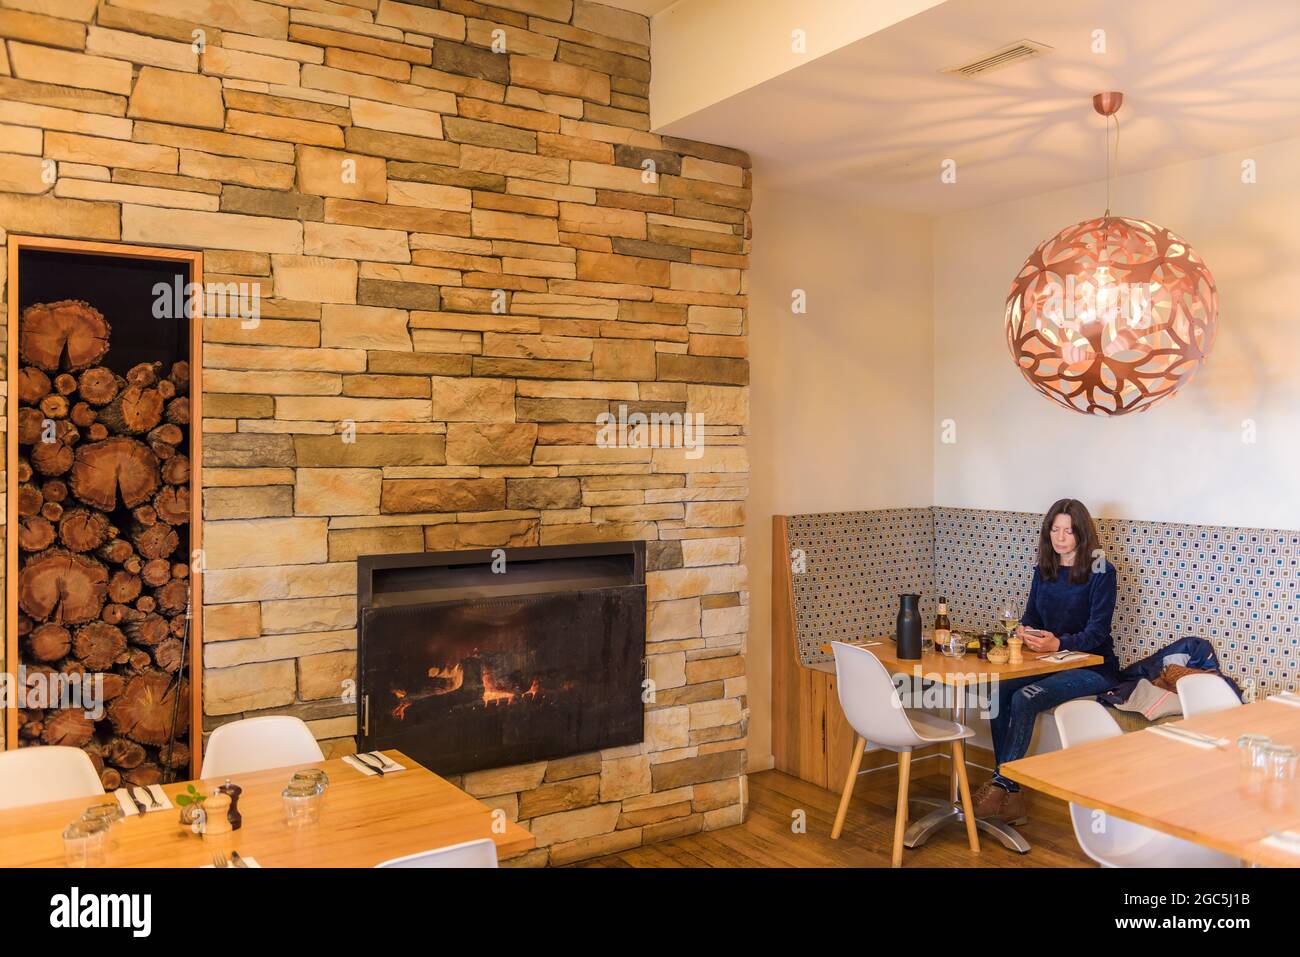 A female tourist sits in an alcove near a burning fireplace enjoying lunch at the 1802 restaurant at Coffin Bay, Eyre Peninsula in South Australia. Stock Photo